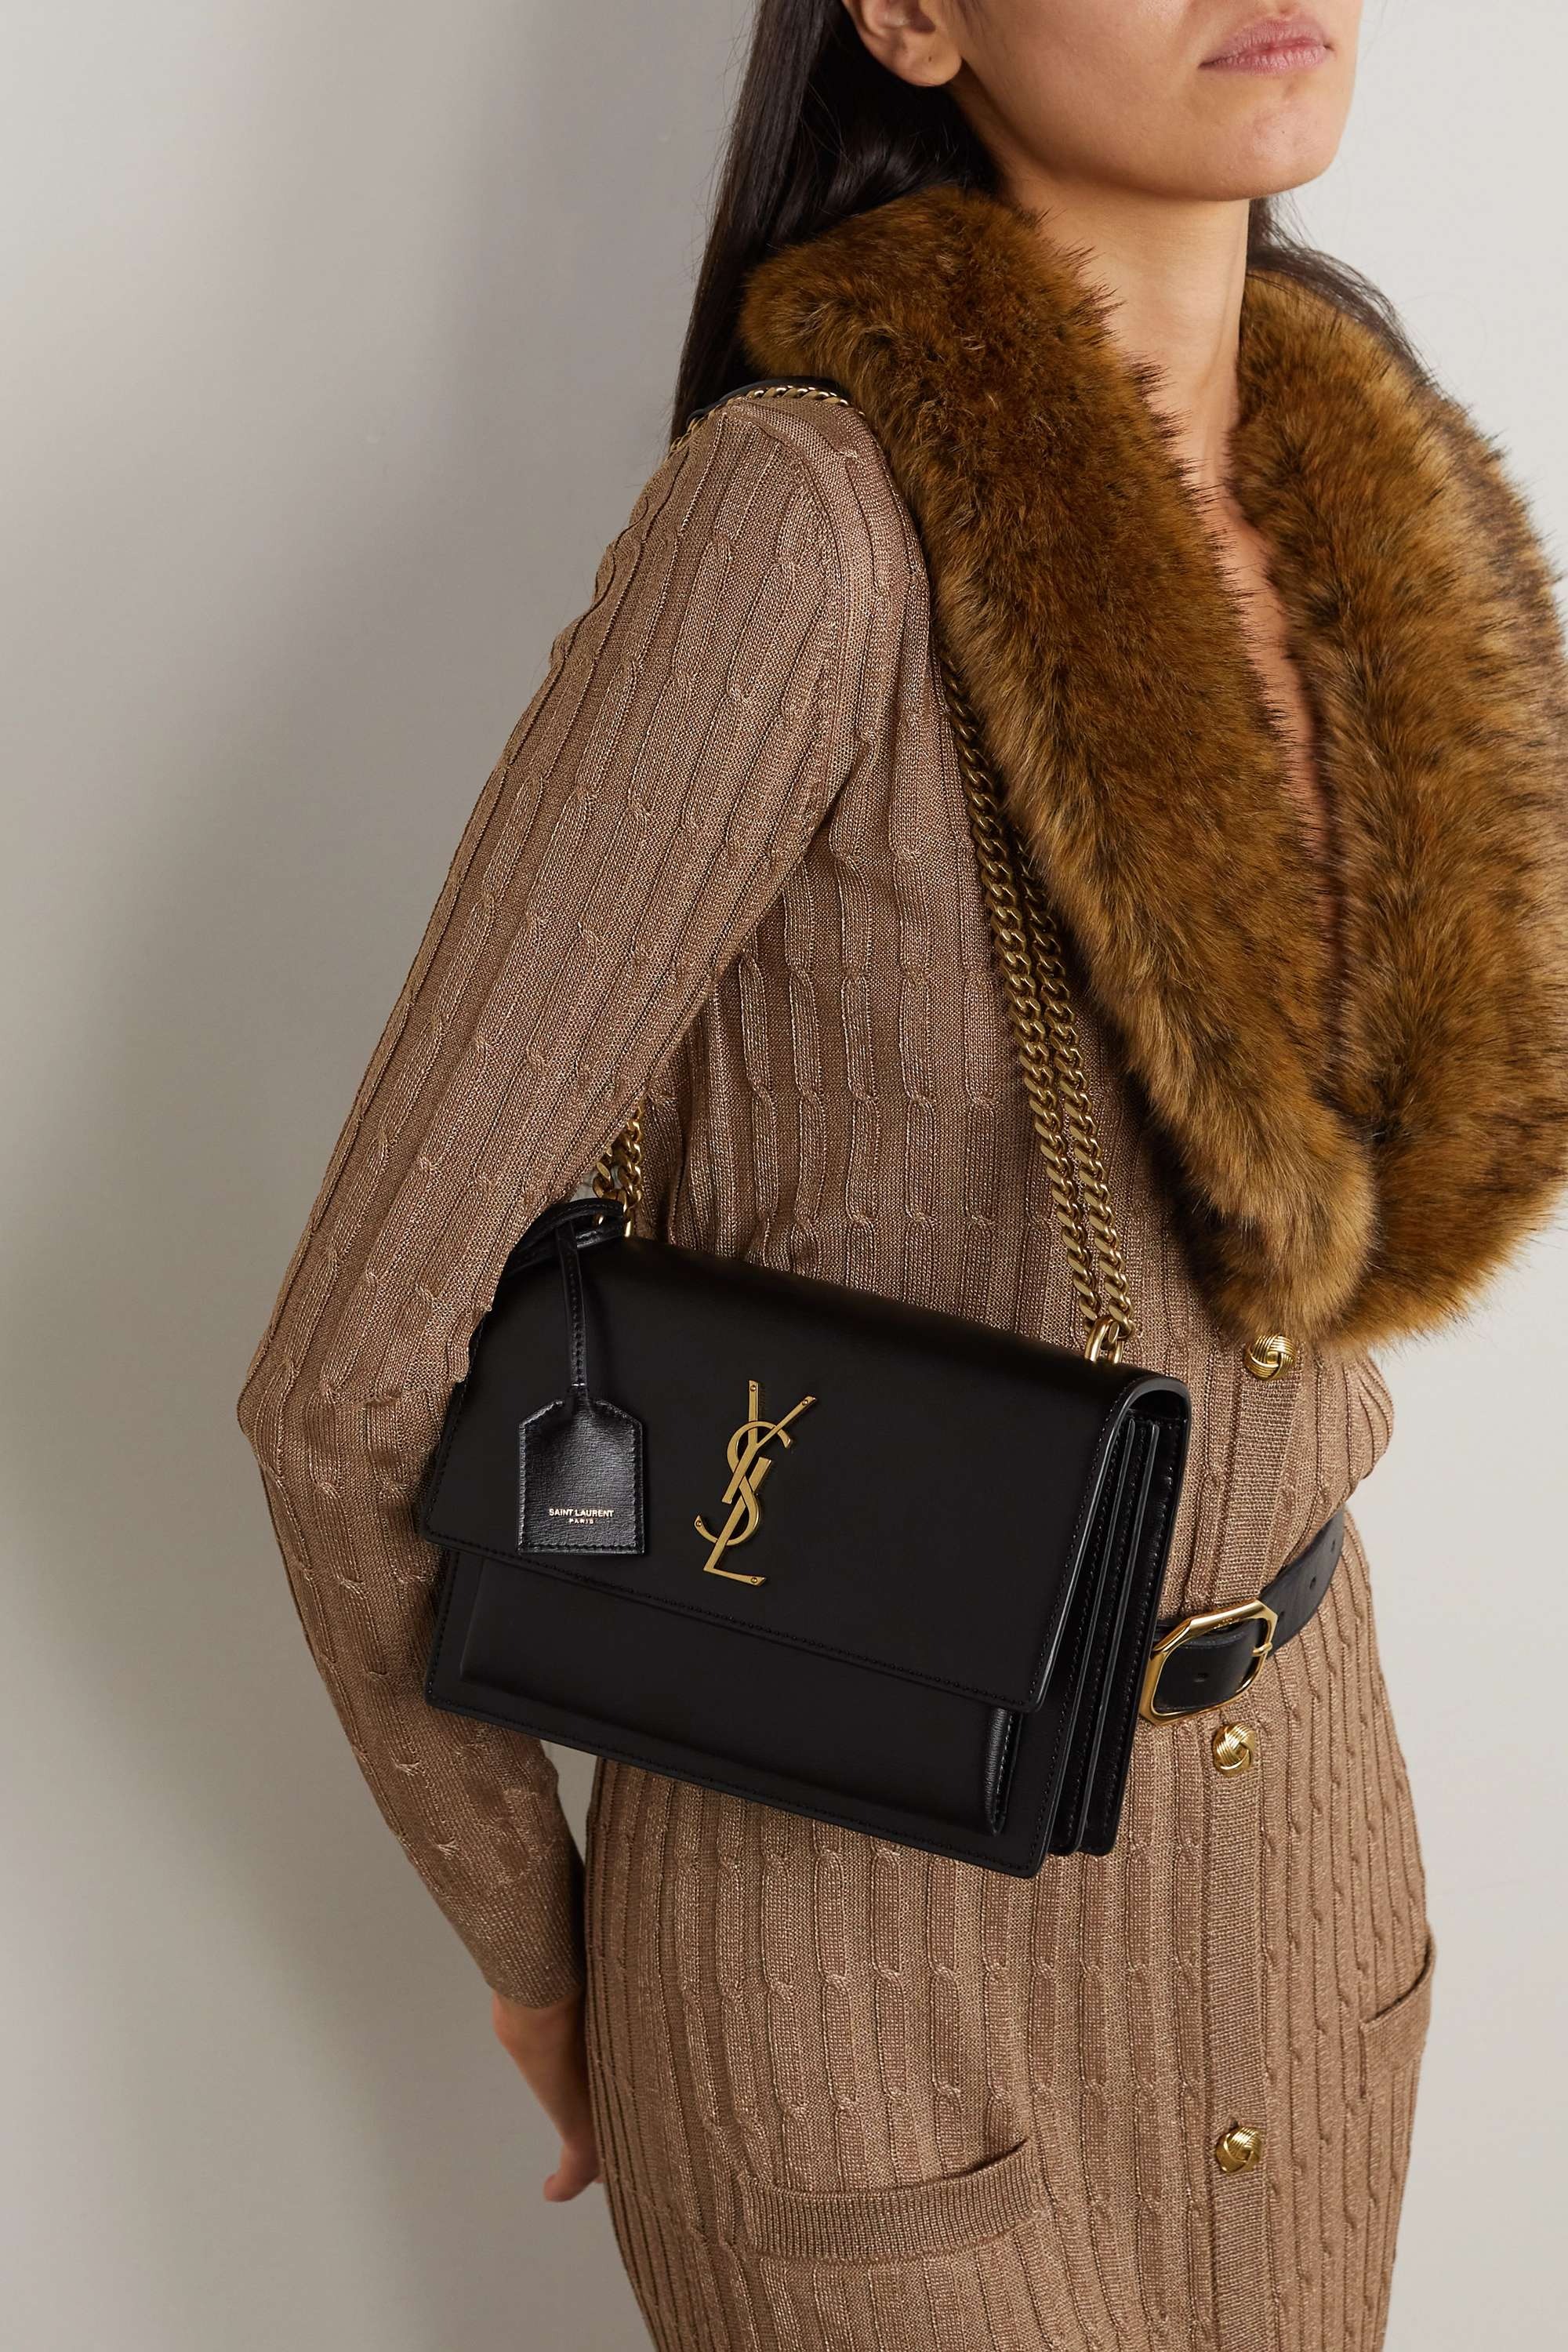 Everything You Need to Know Before Buying a YSL Bag